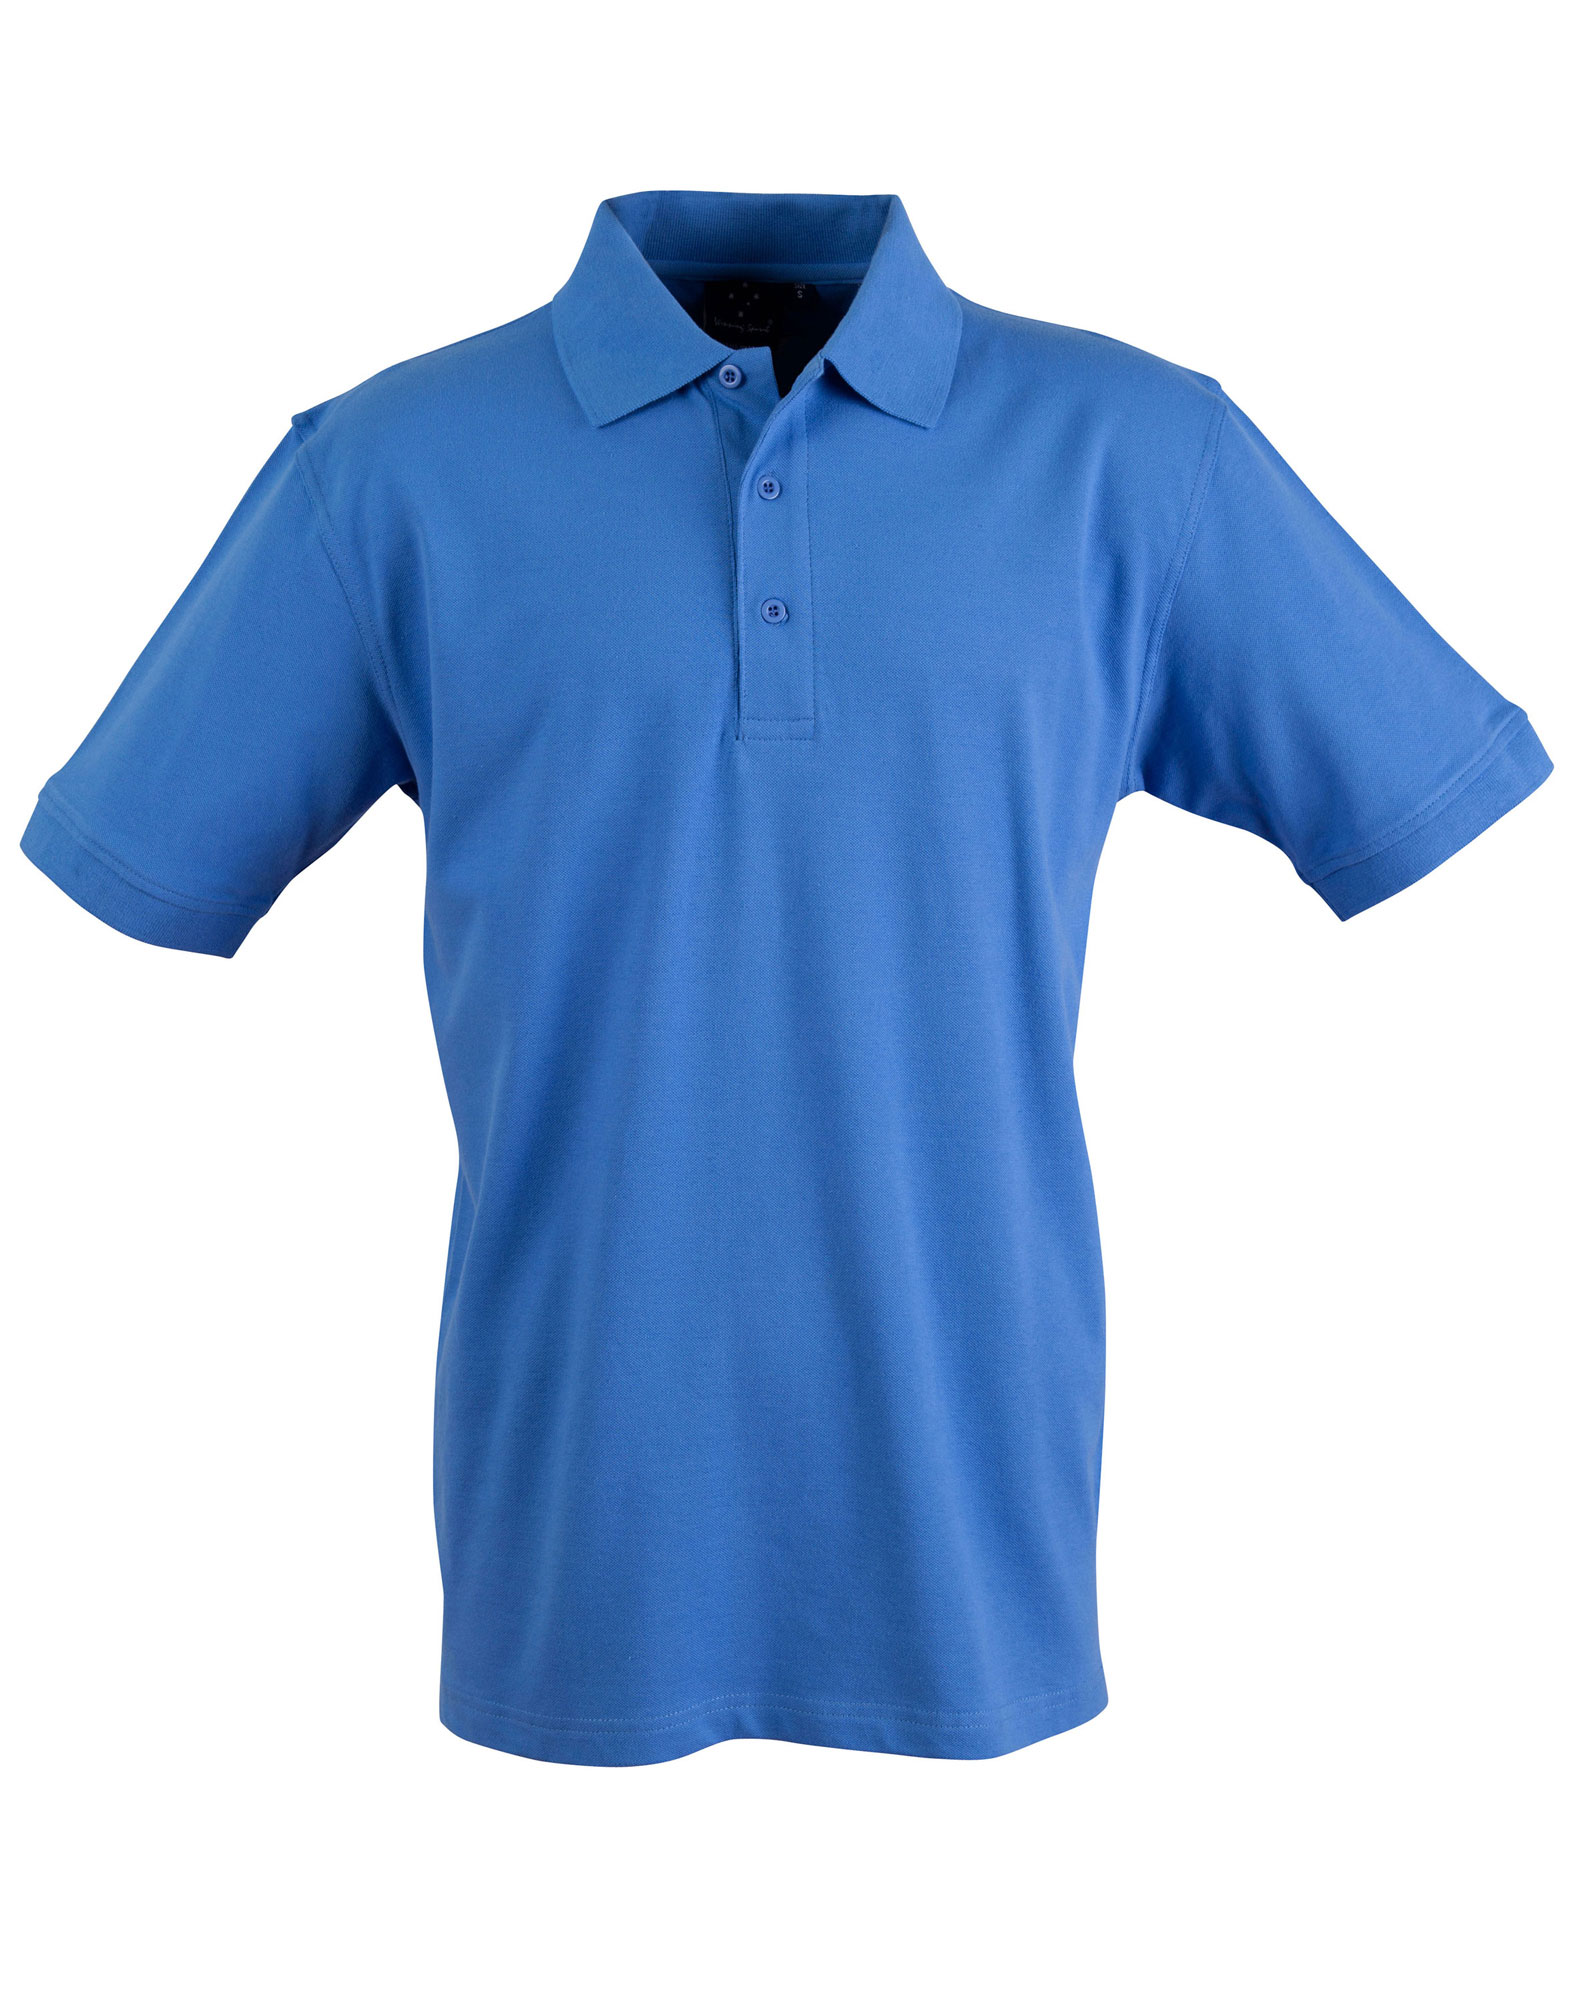 Custom Mens Darling Harbour Cotton Stretch Polo Shirts Online in Perth